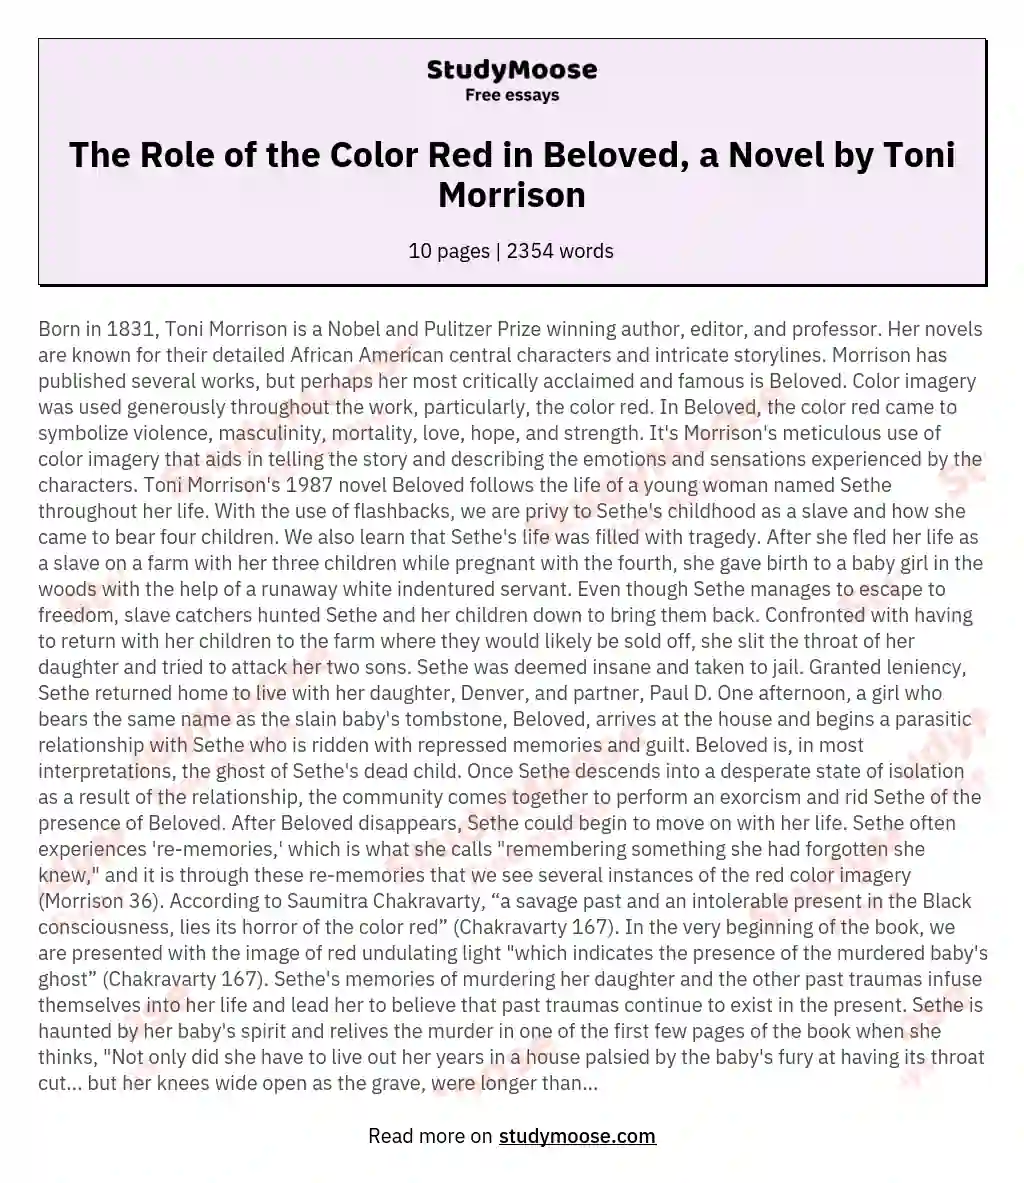 The Role of the Color Red in Beloved, a Novel by Toni Morrison essay